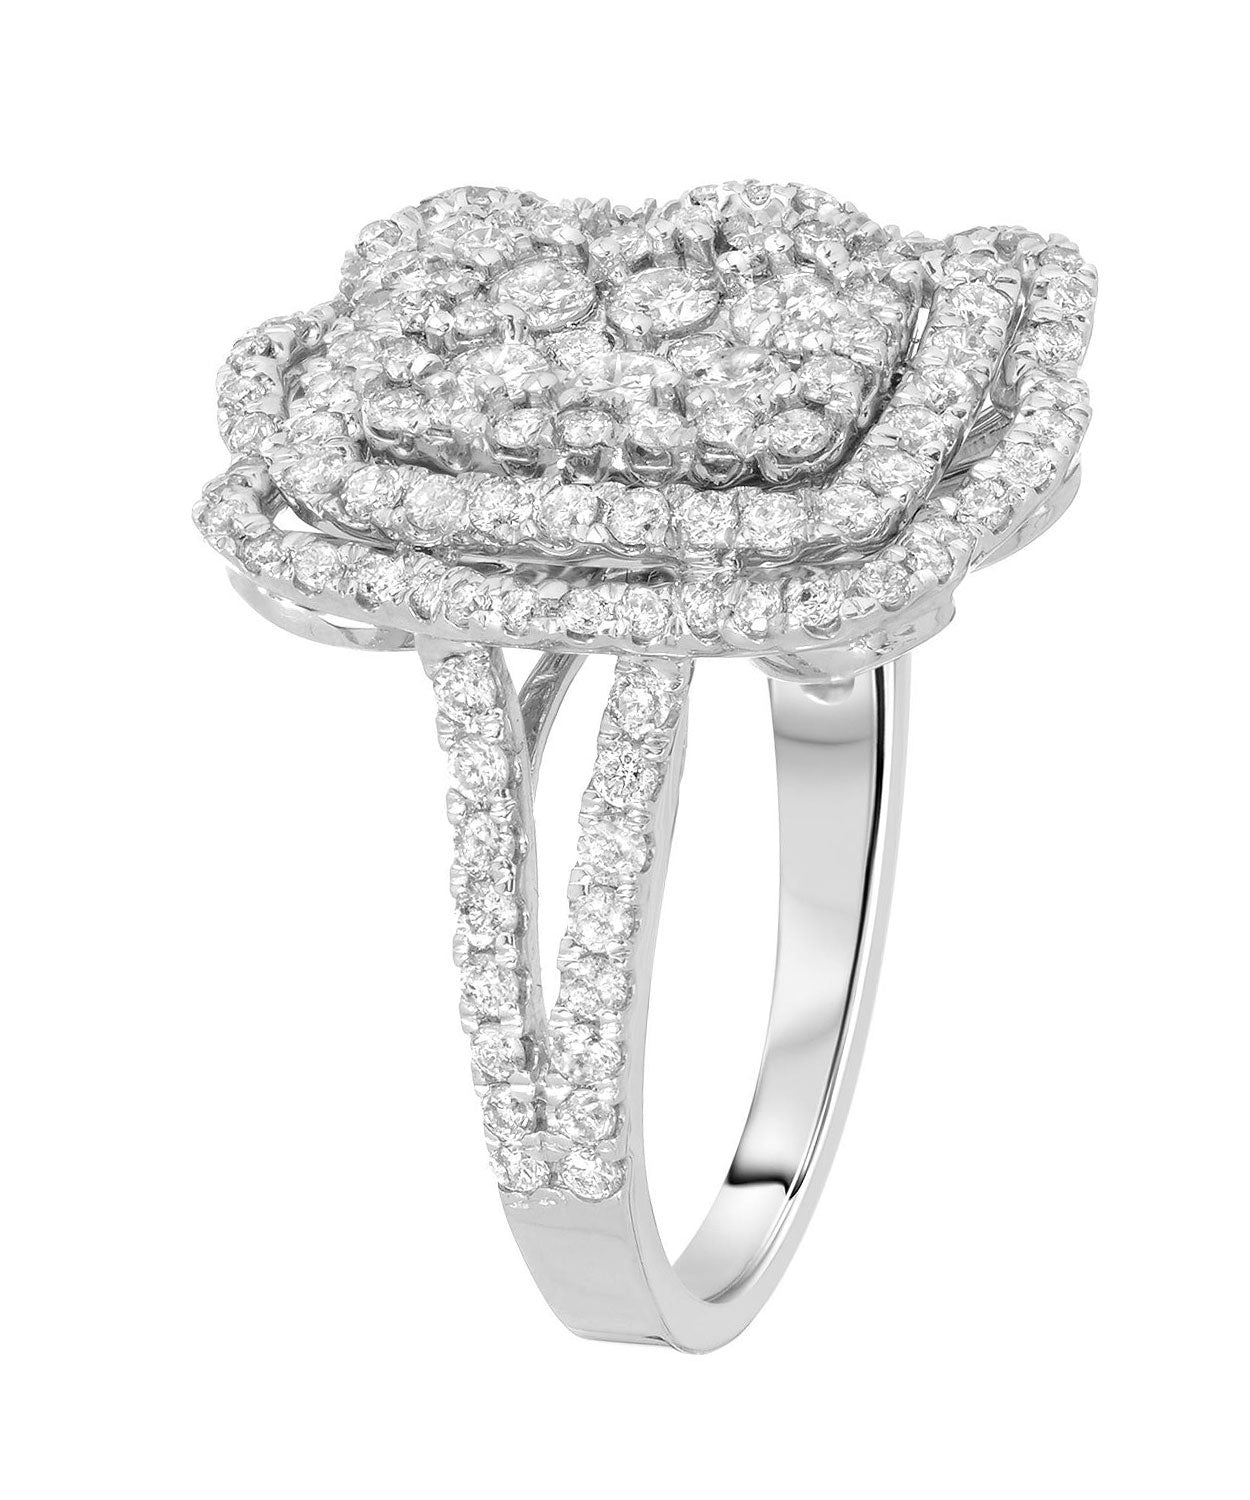 Signature Collection 1.50 ctw Diamond 14k White Gold Statement Right Hand Ring View 2